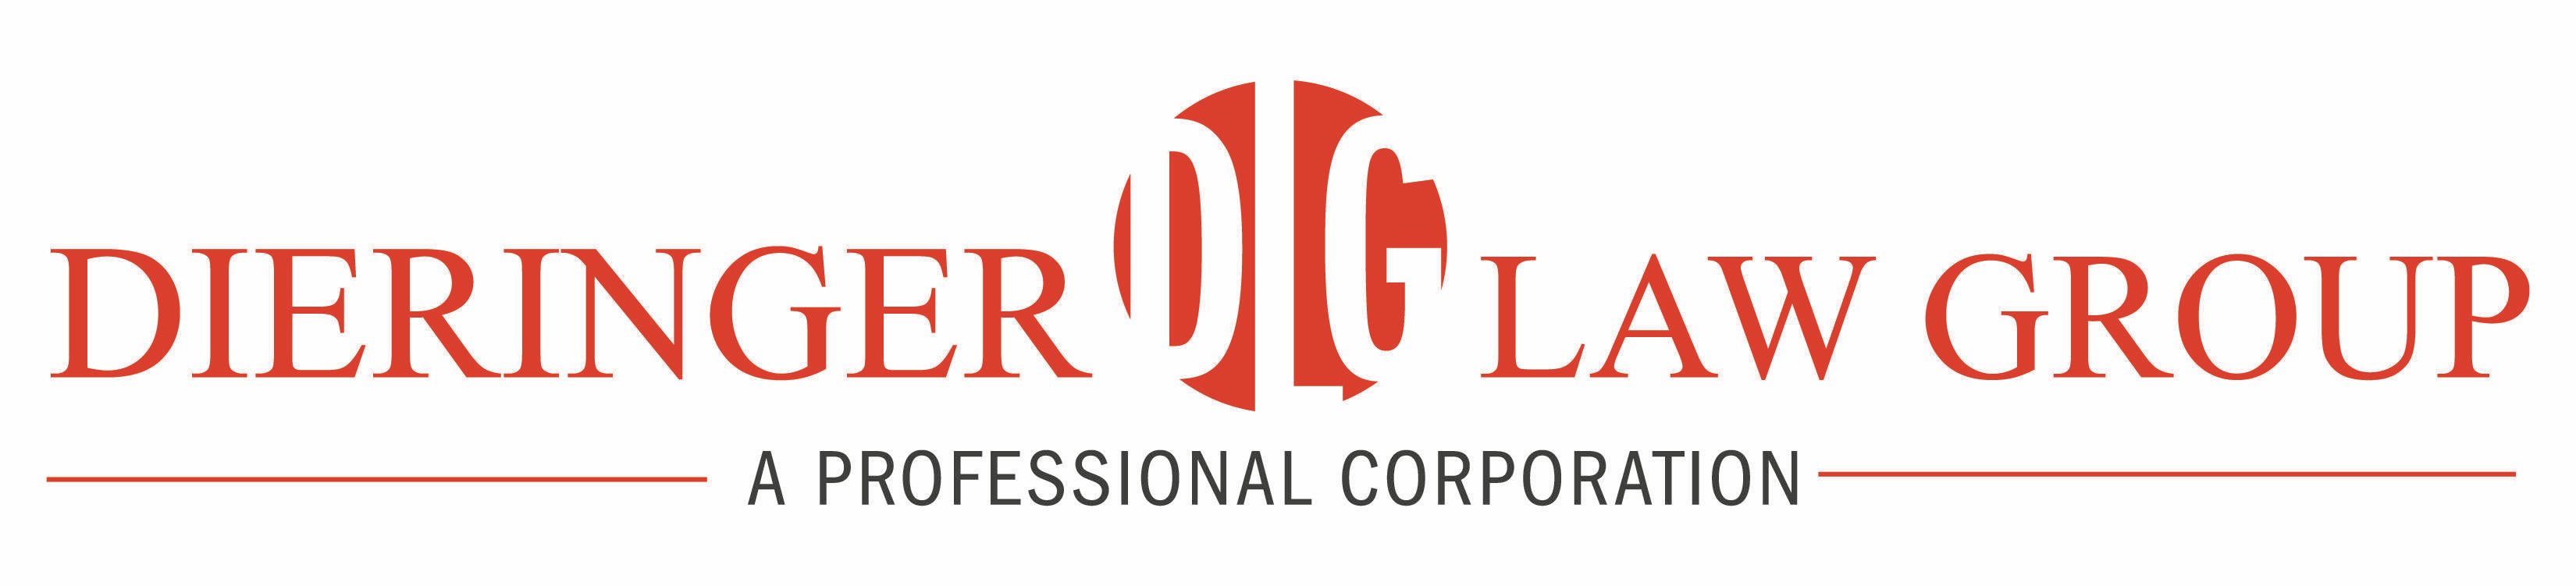 Dieringer Logo - Dieringer Law Group, A Professional Corporation – Member Directory